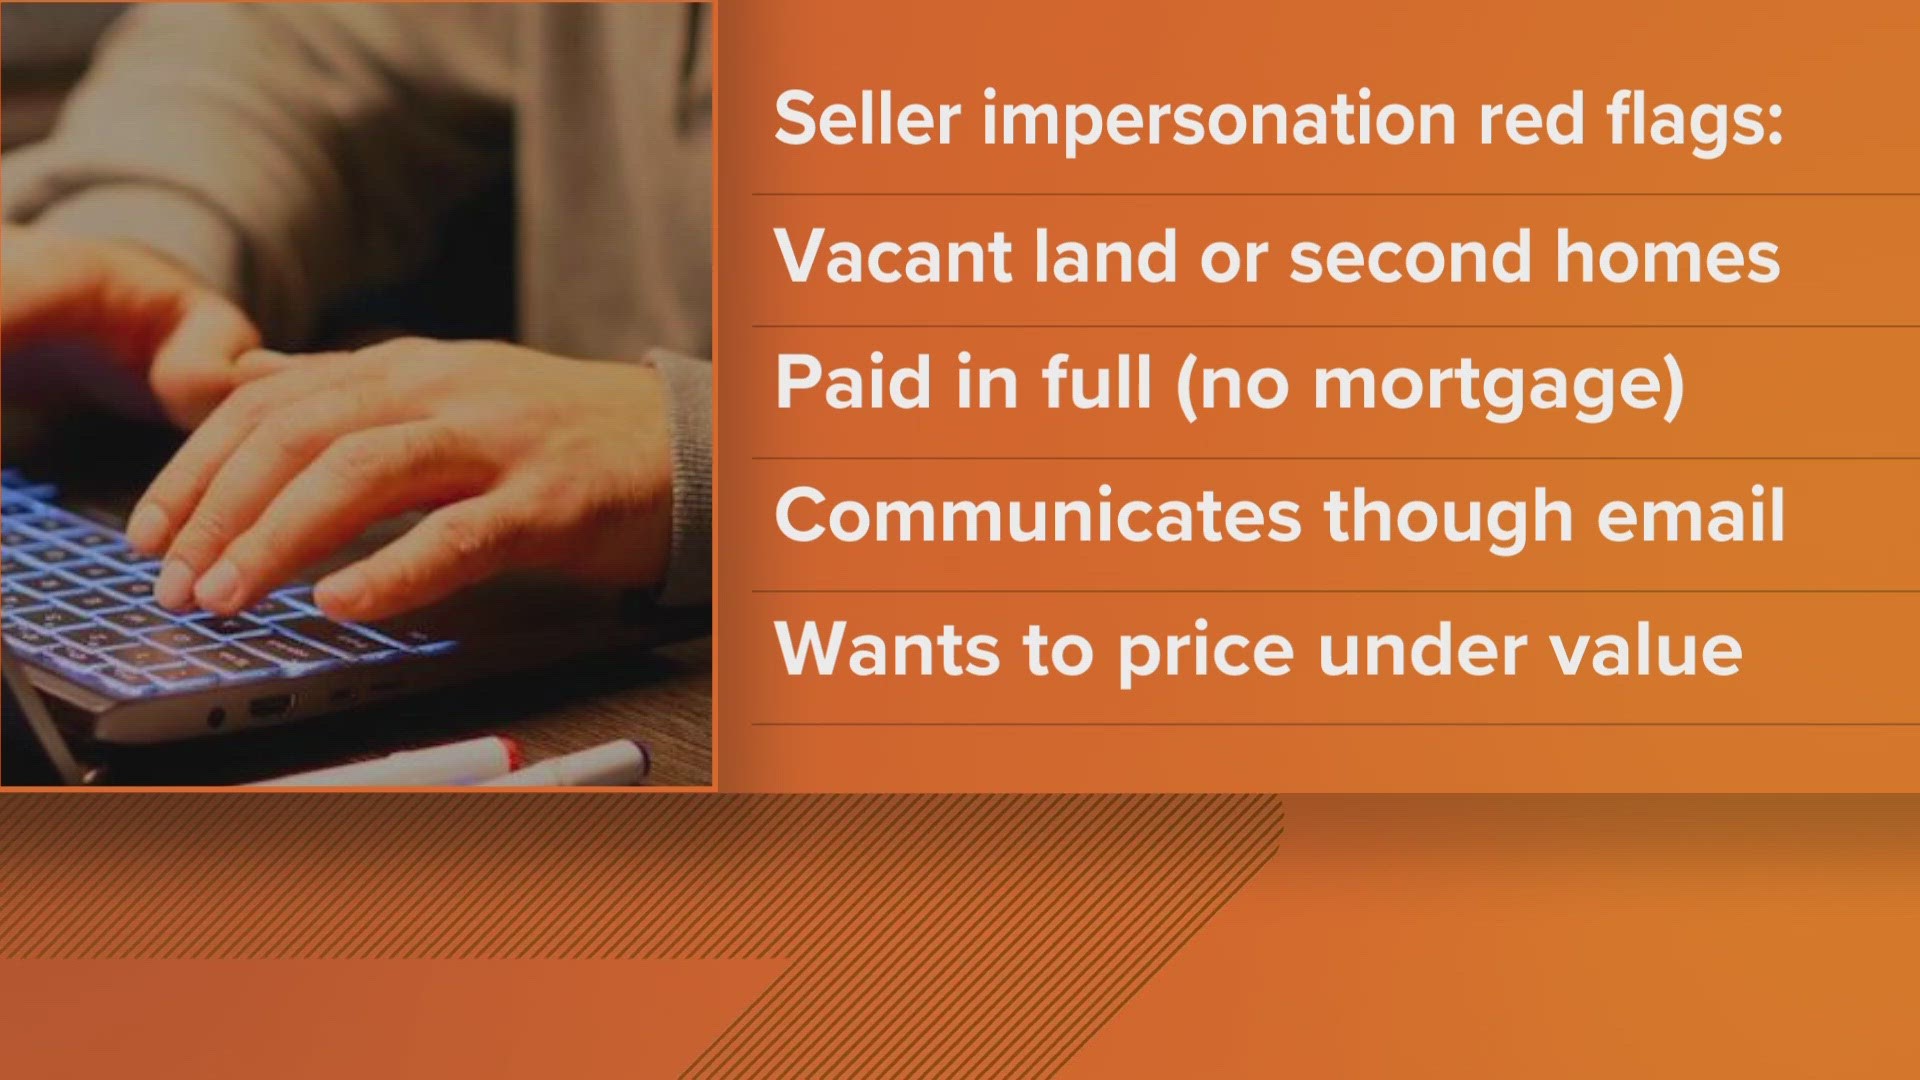 Real estate expert Lane Lyon discusses an uptick in scammers trying to sell property they don't actually own.